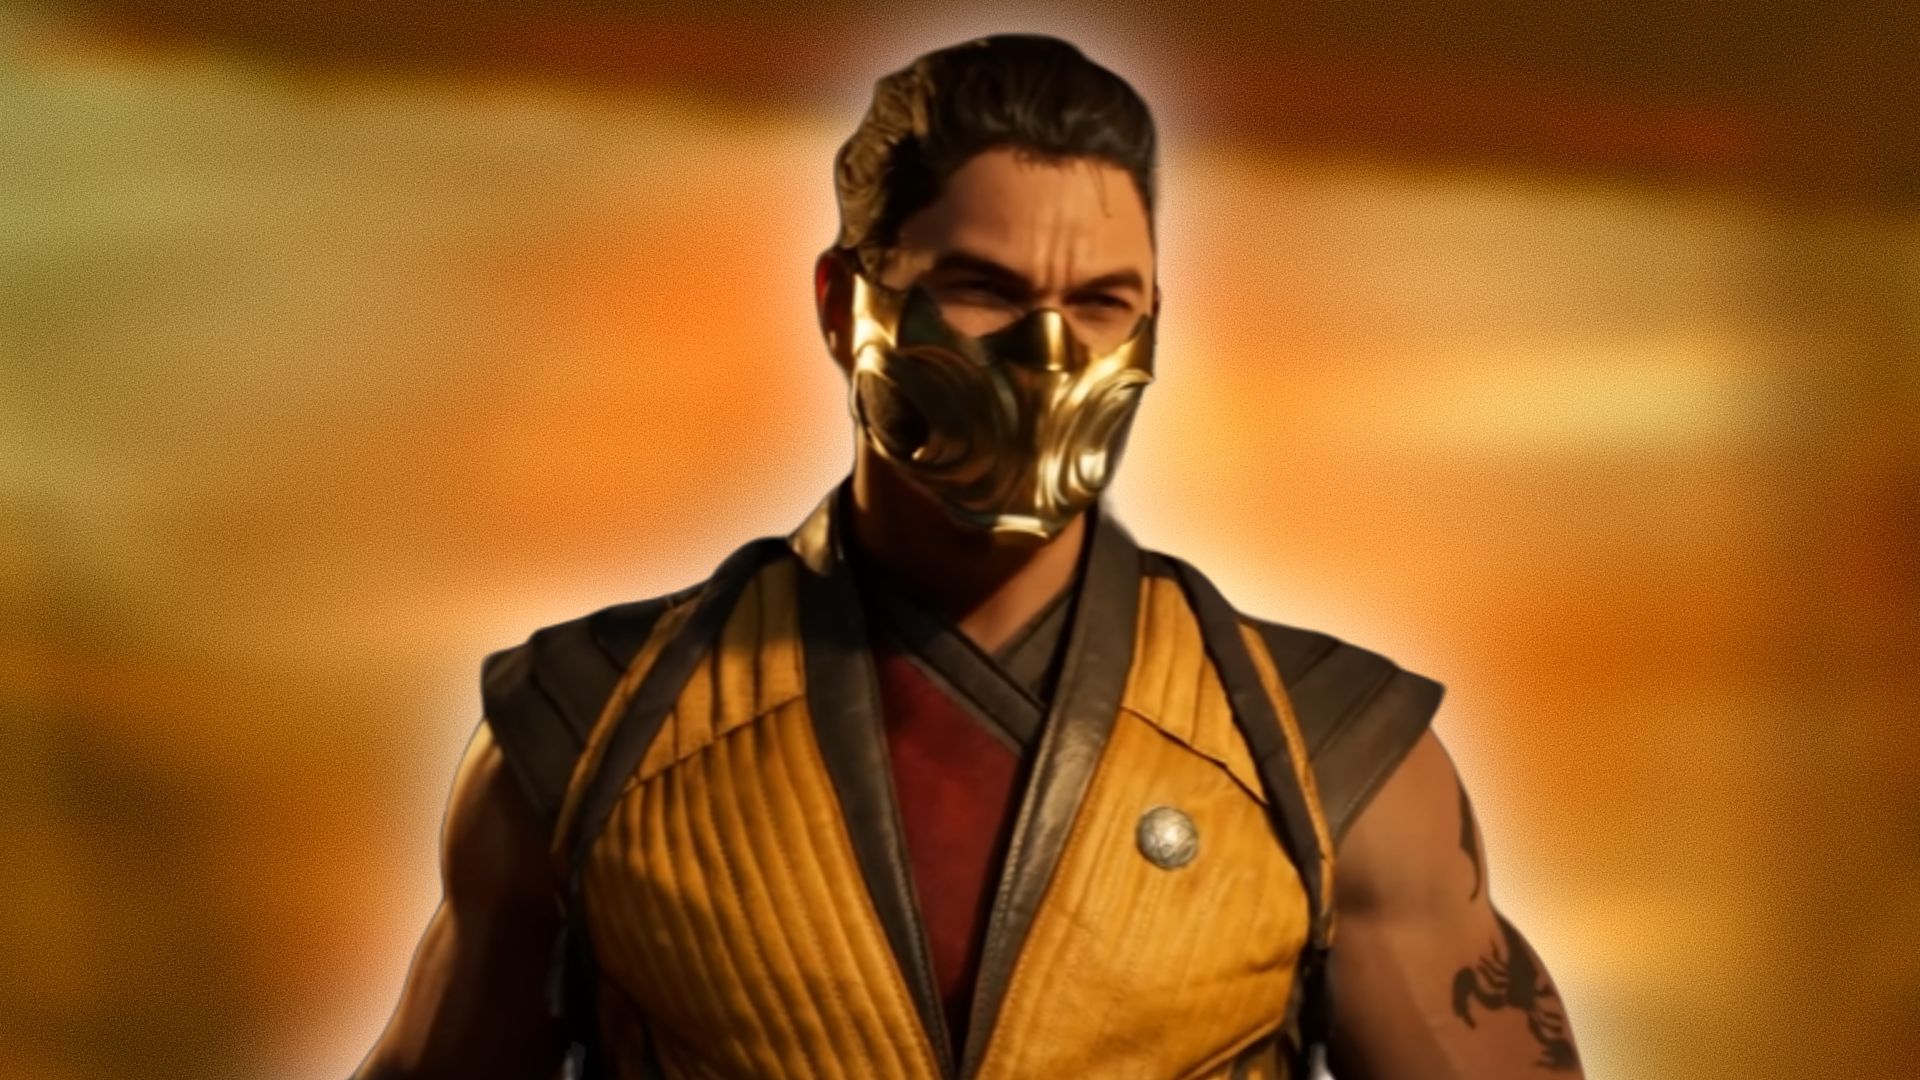 Mortal Kombat 1 reboot announced, and it's coming out in September